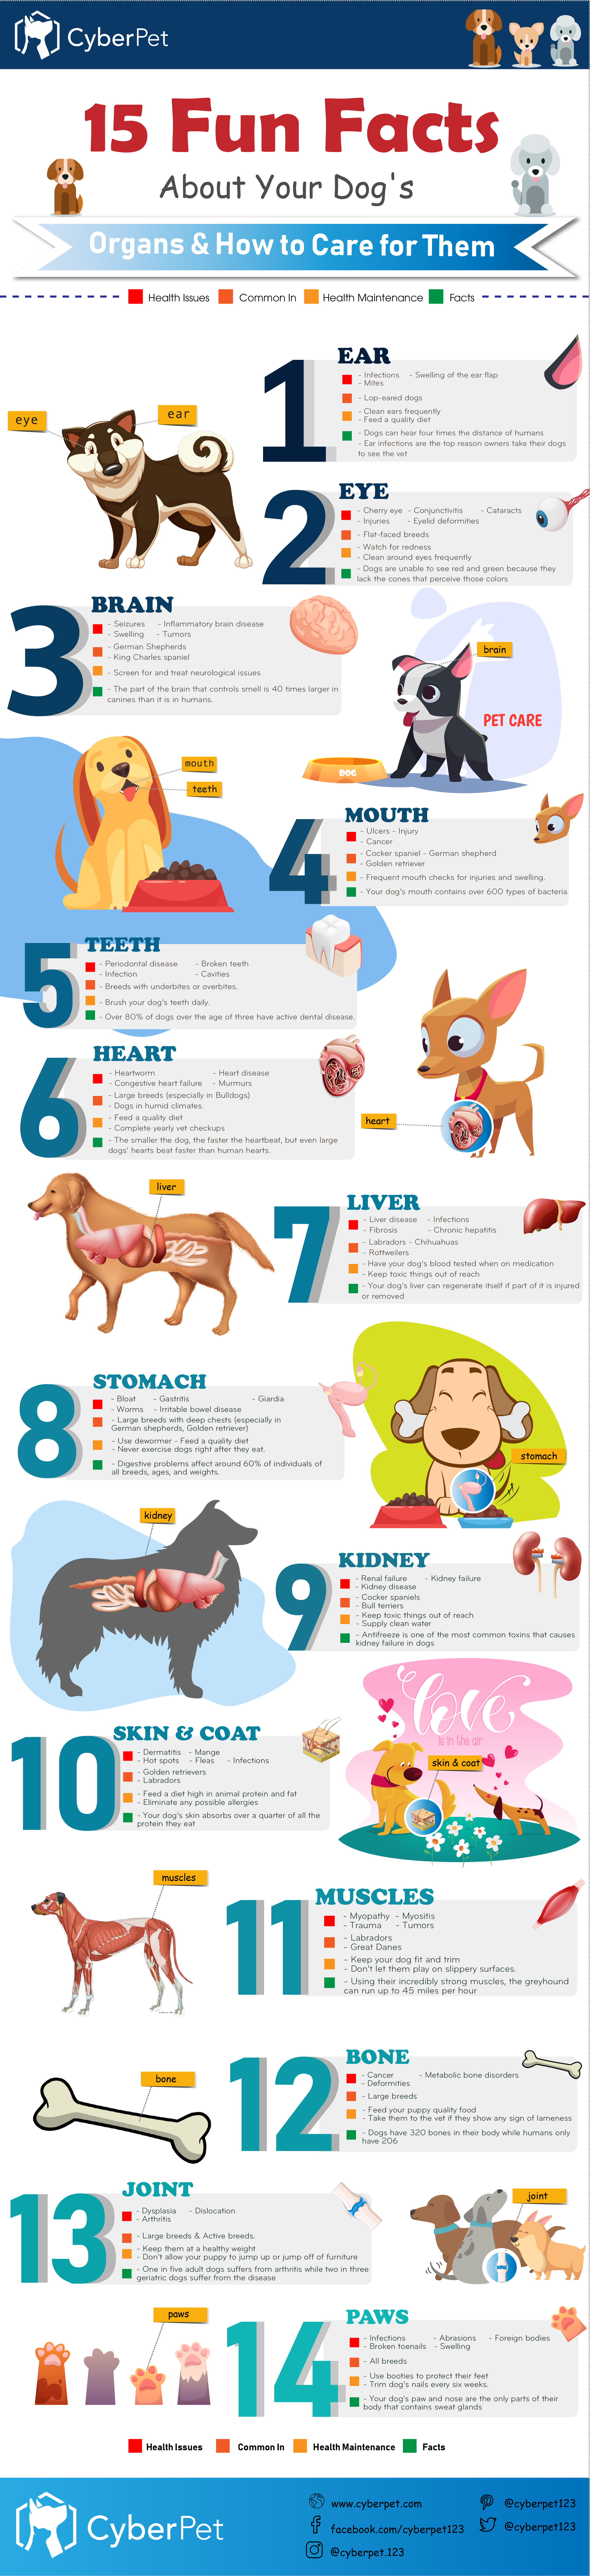 Things You Should Know To Care For Your Dog’s Organs